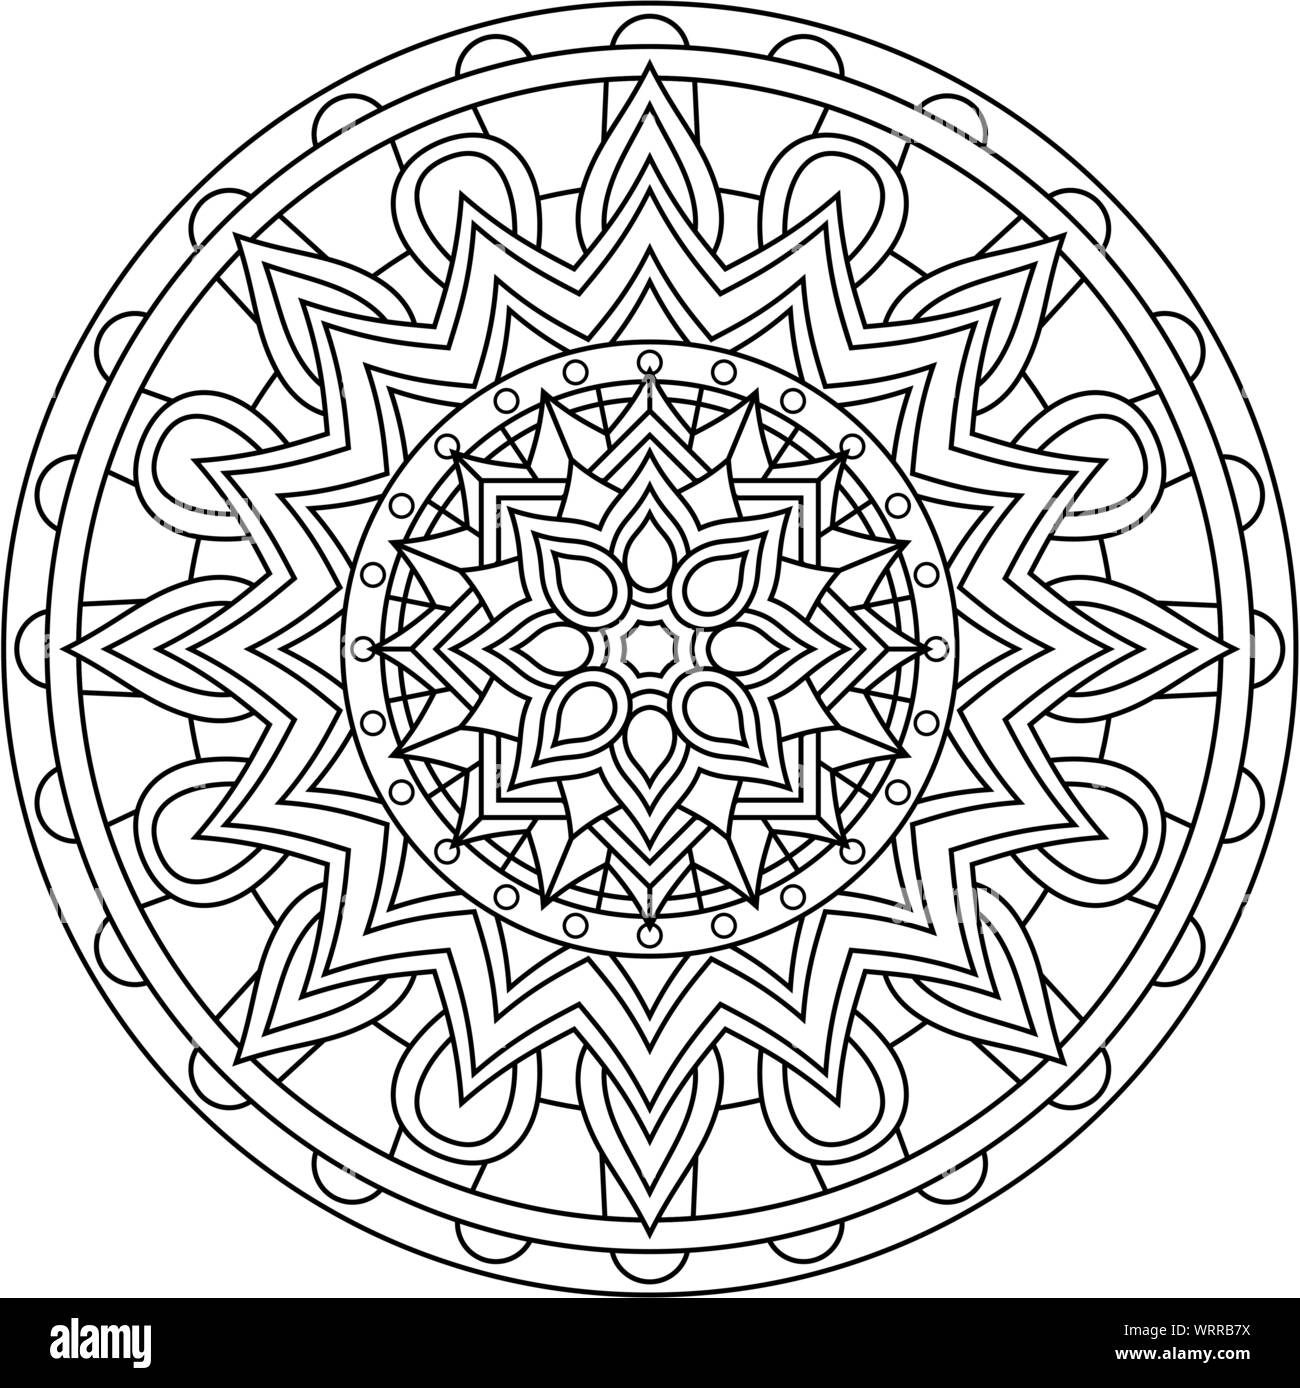 vector mandala art for coloring with abstract and geometric design elements isolated on white background Stock Vector